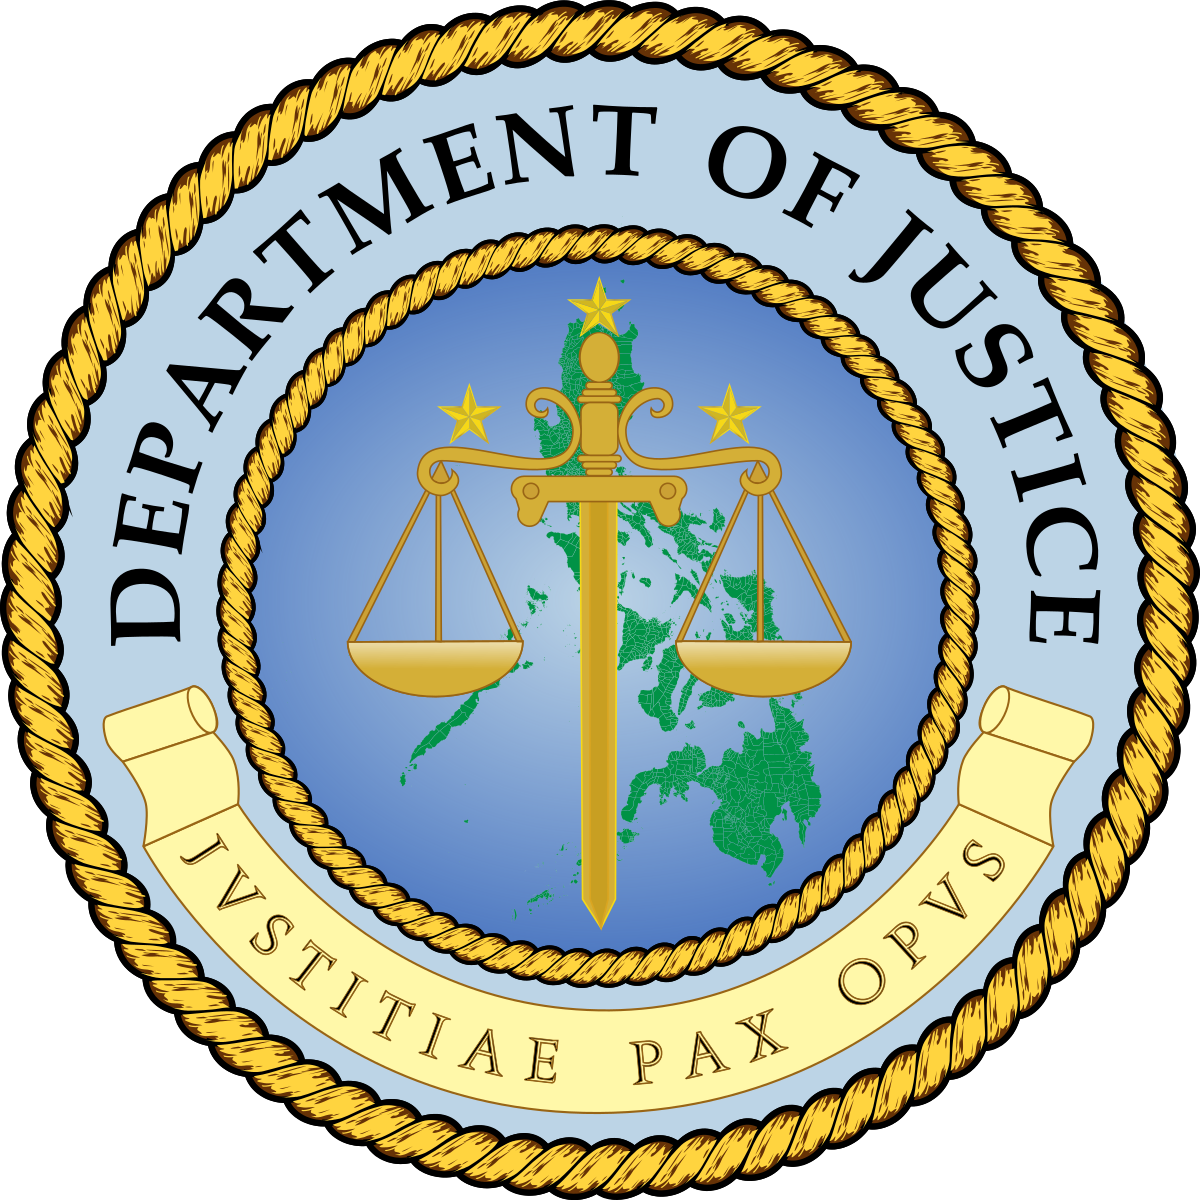 United States Department Of Justice (1200x1200)